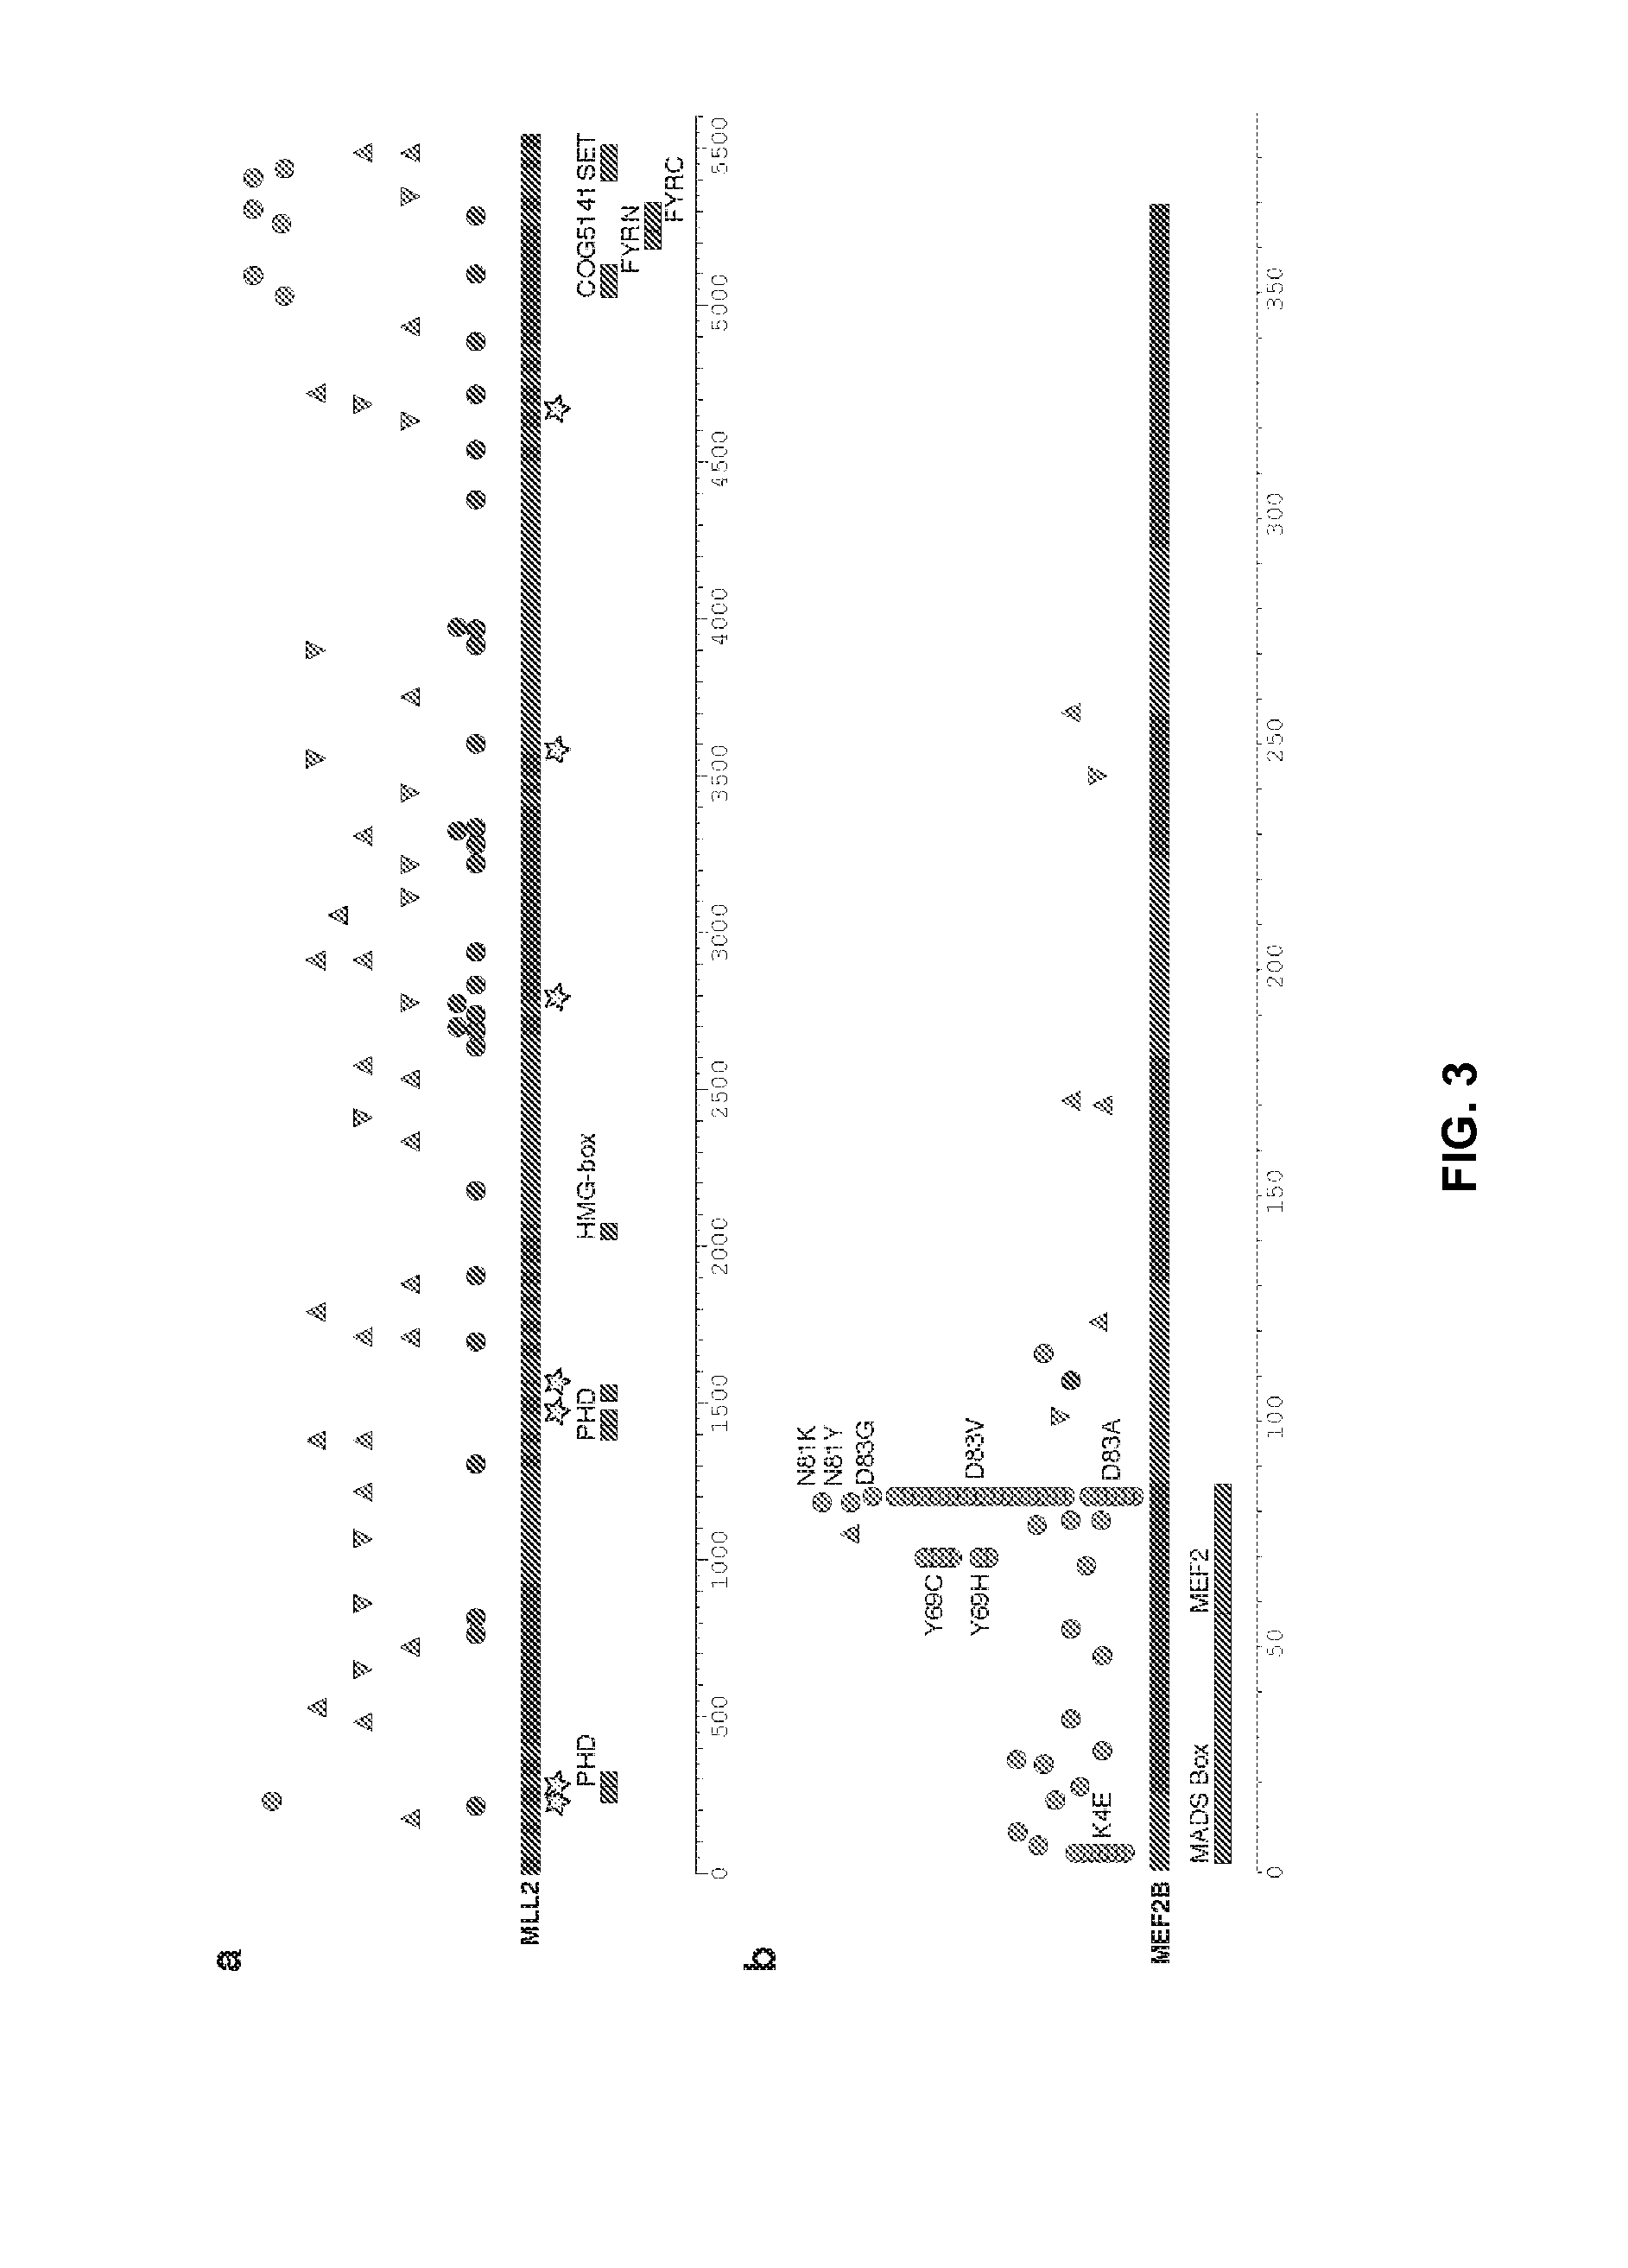 Biomarkers for Non-Hodgkin Lymphomas and Uses Thereof